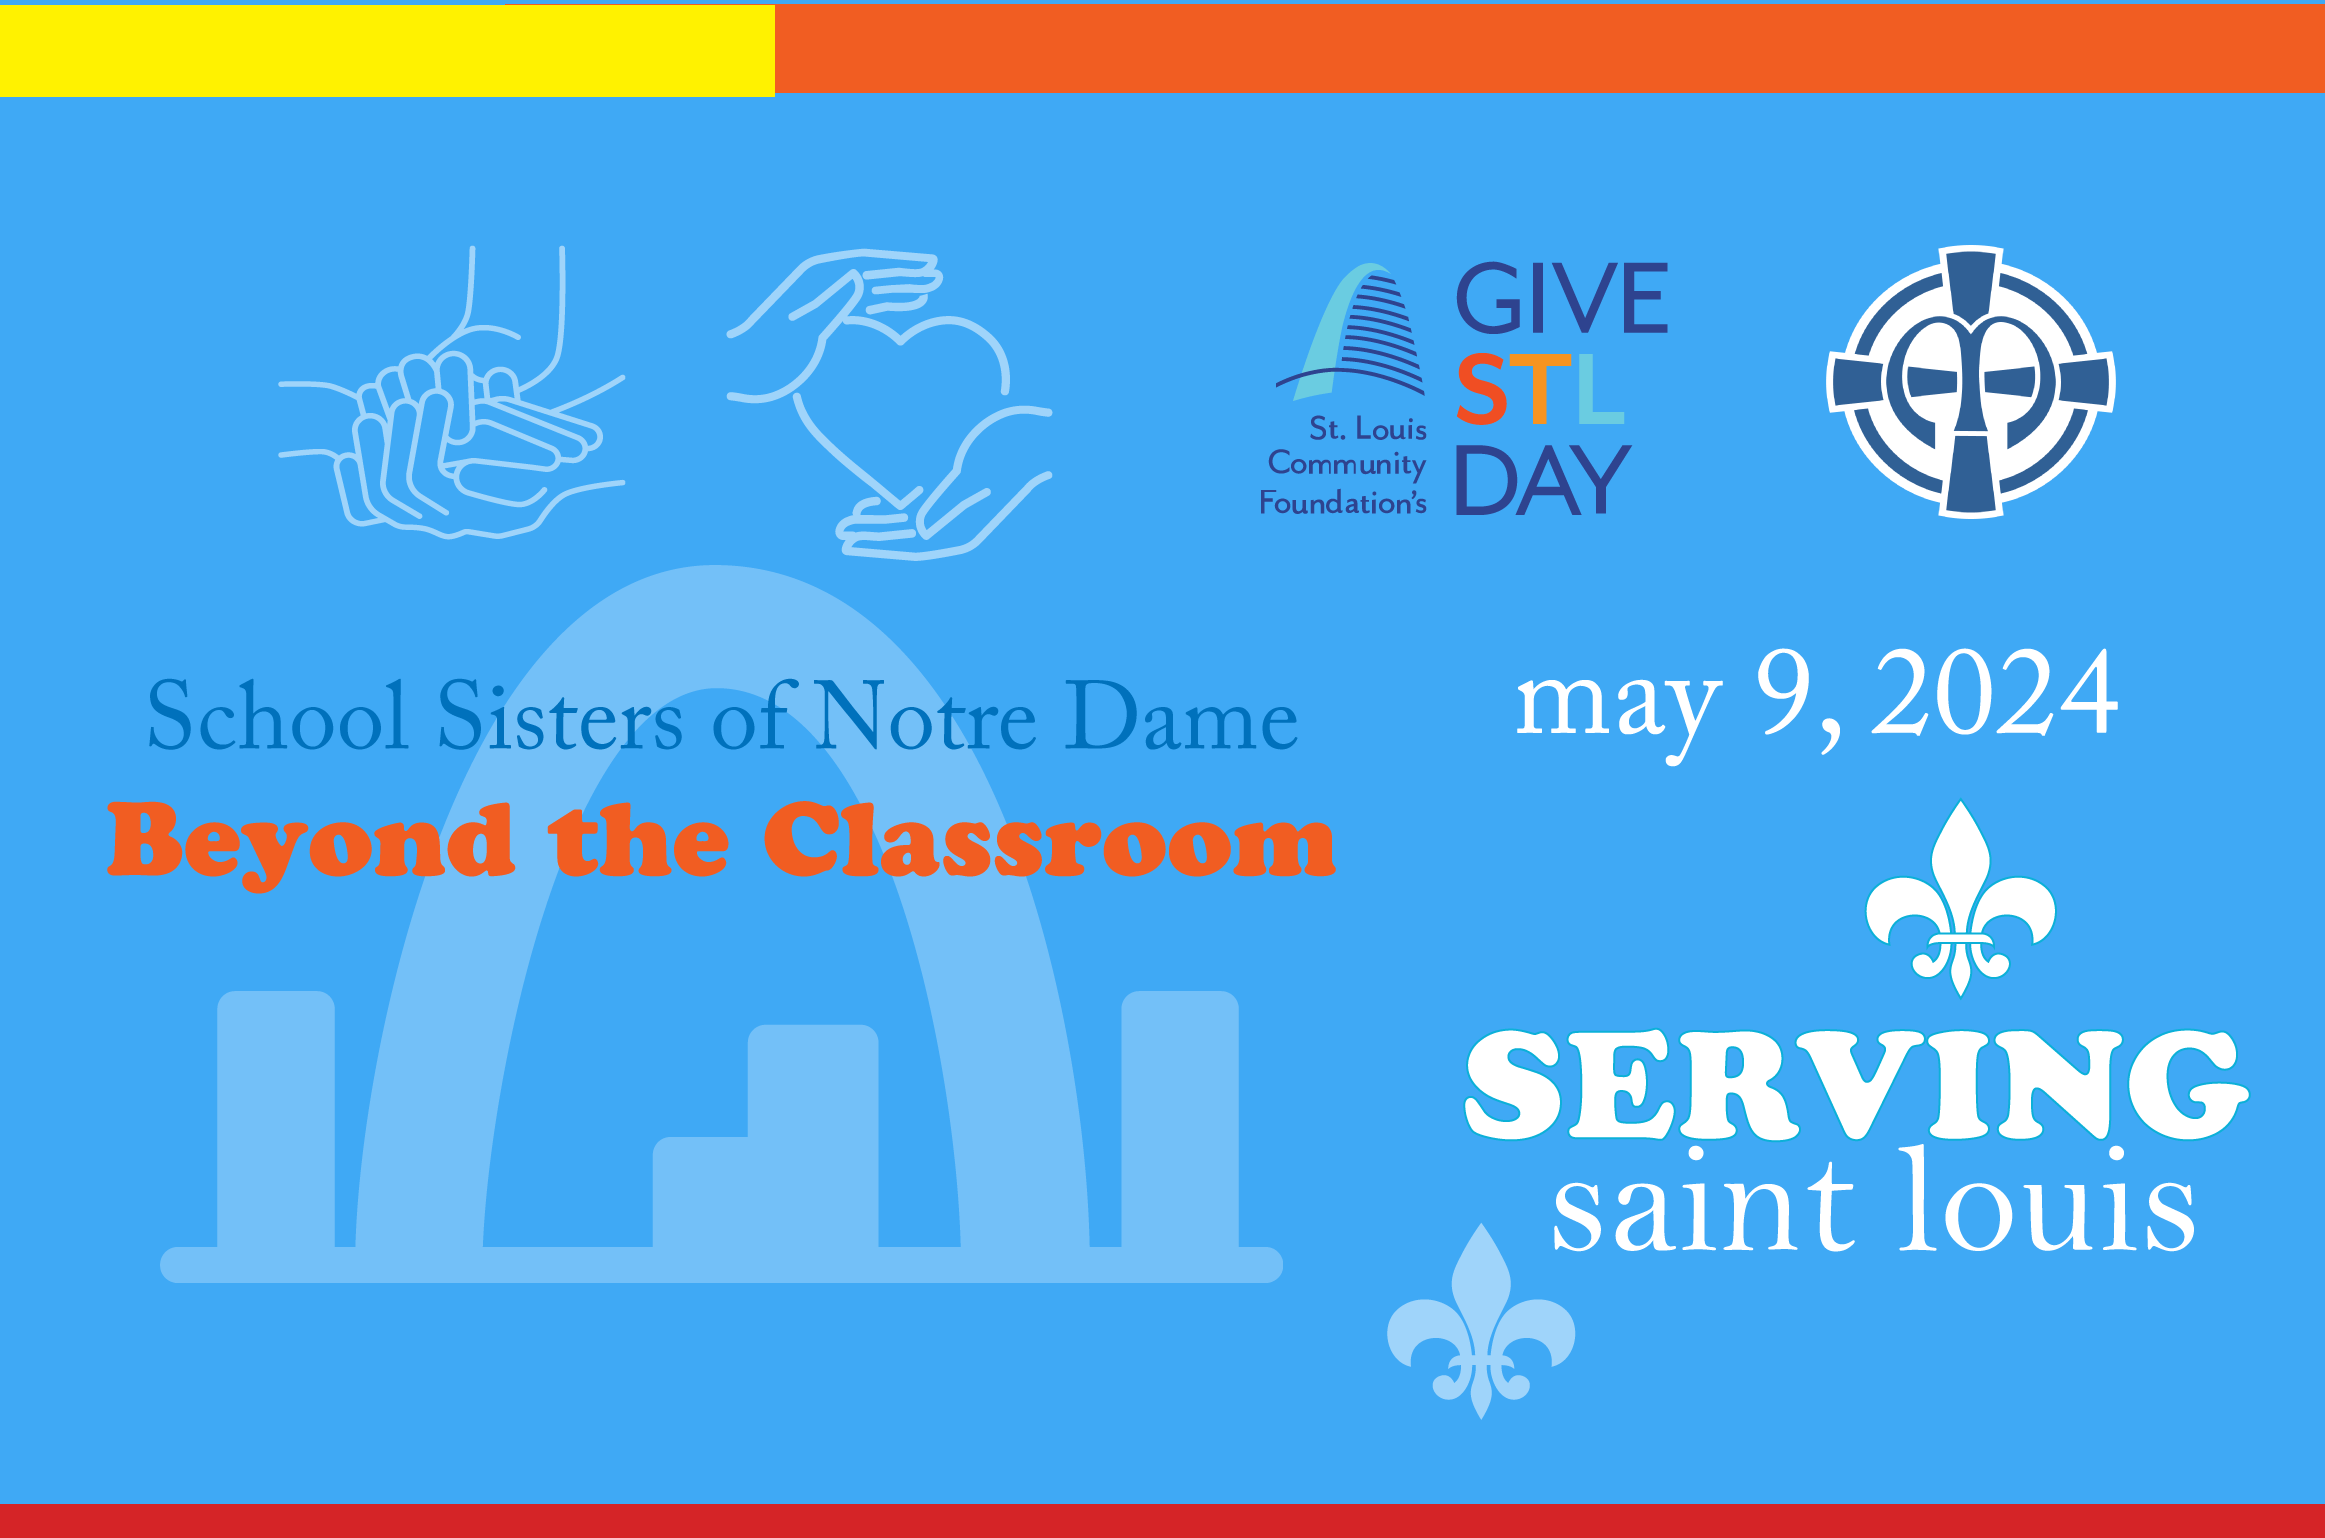 Give STL day event image, serving beyond the classroom. Hands coming together, heart in hands, and the St Louis Arch. May 9, 2024